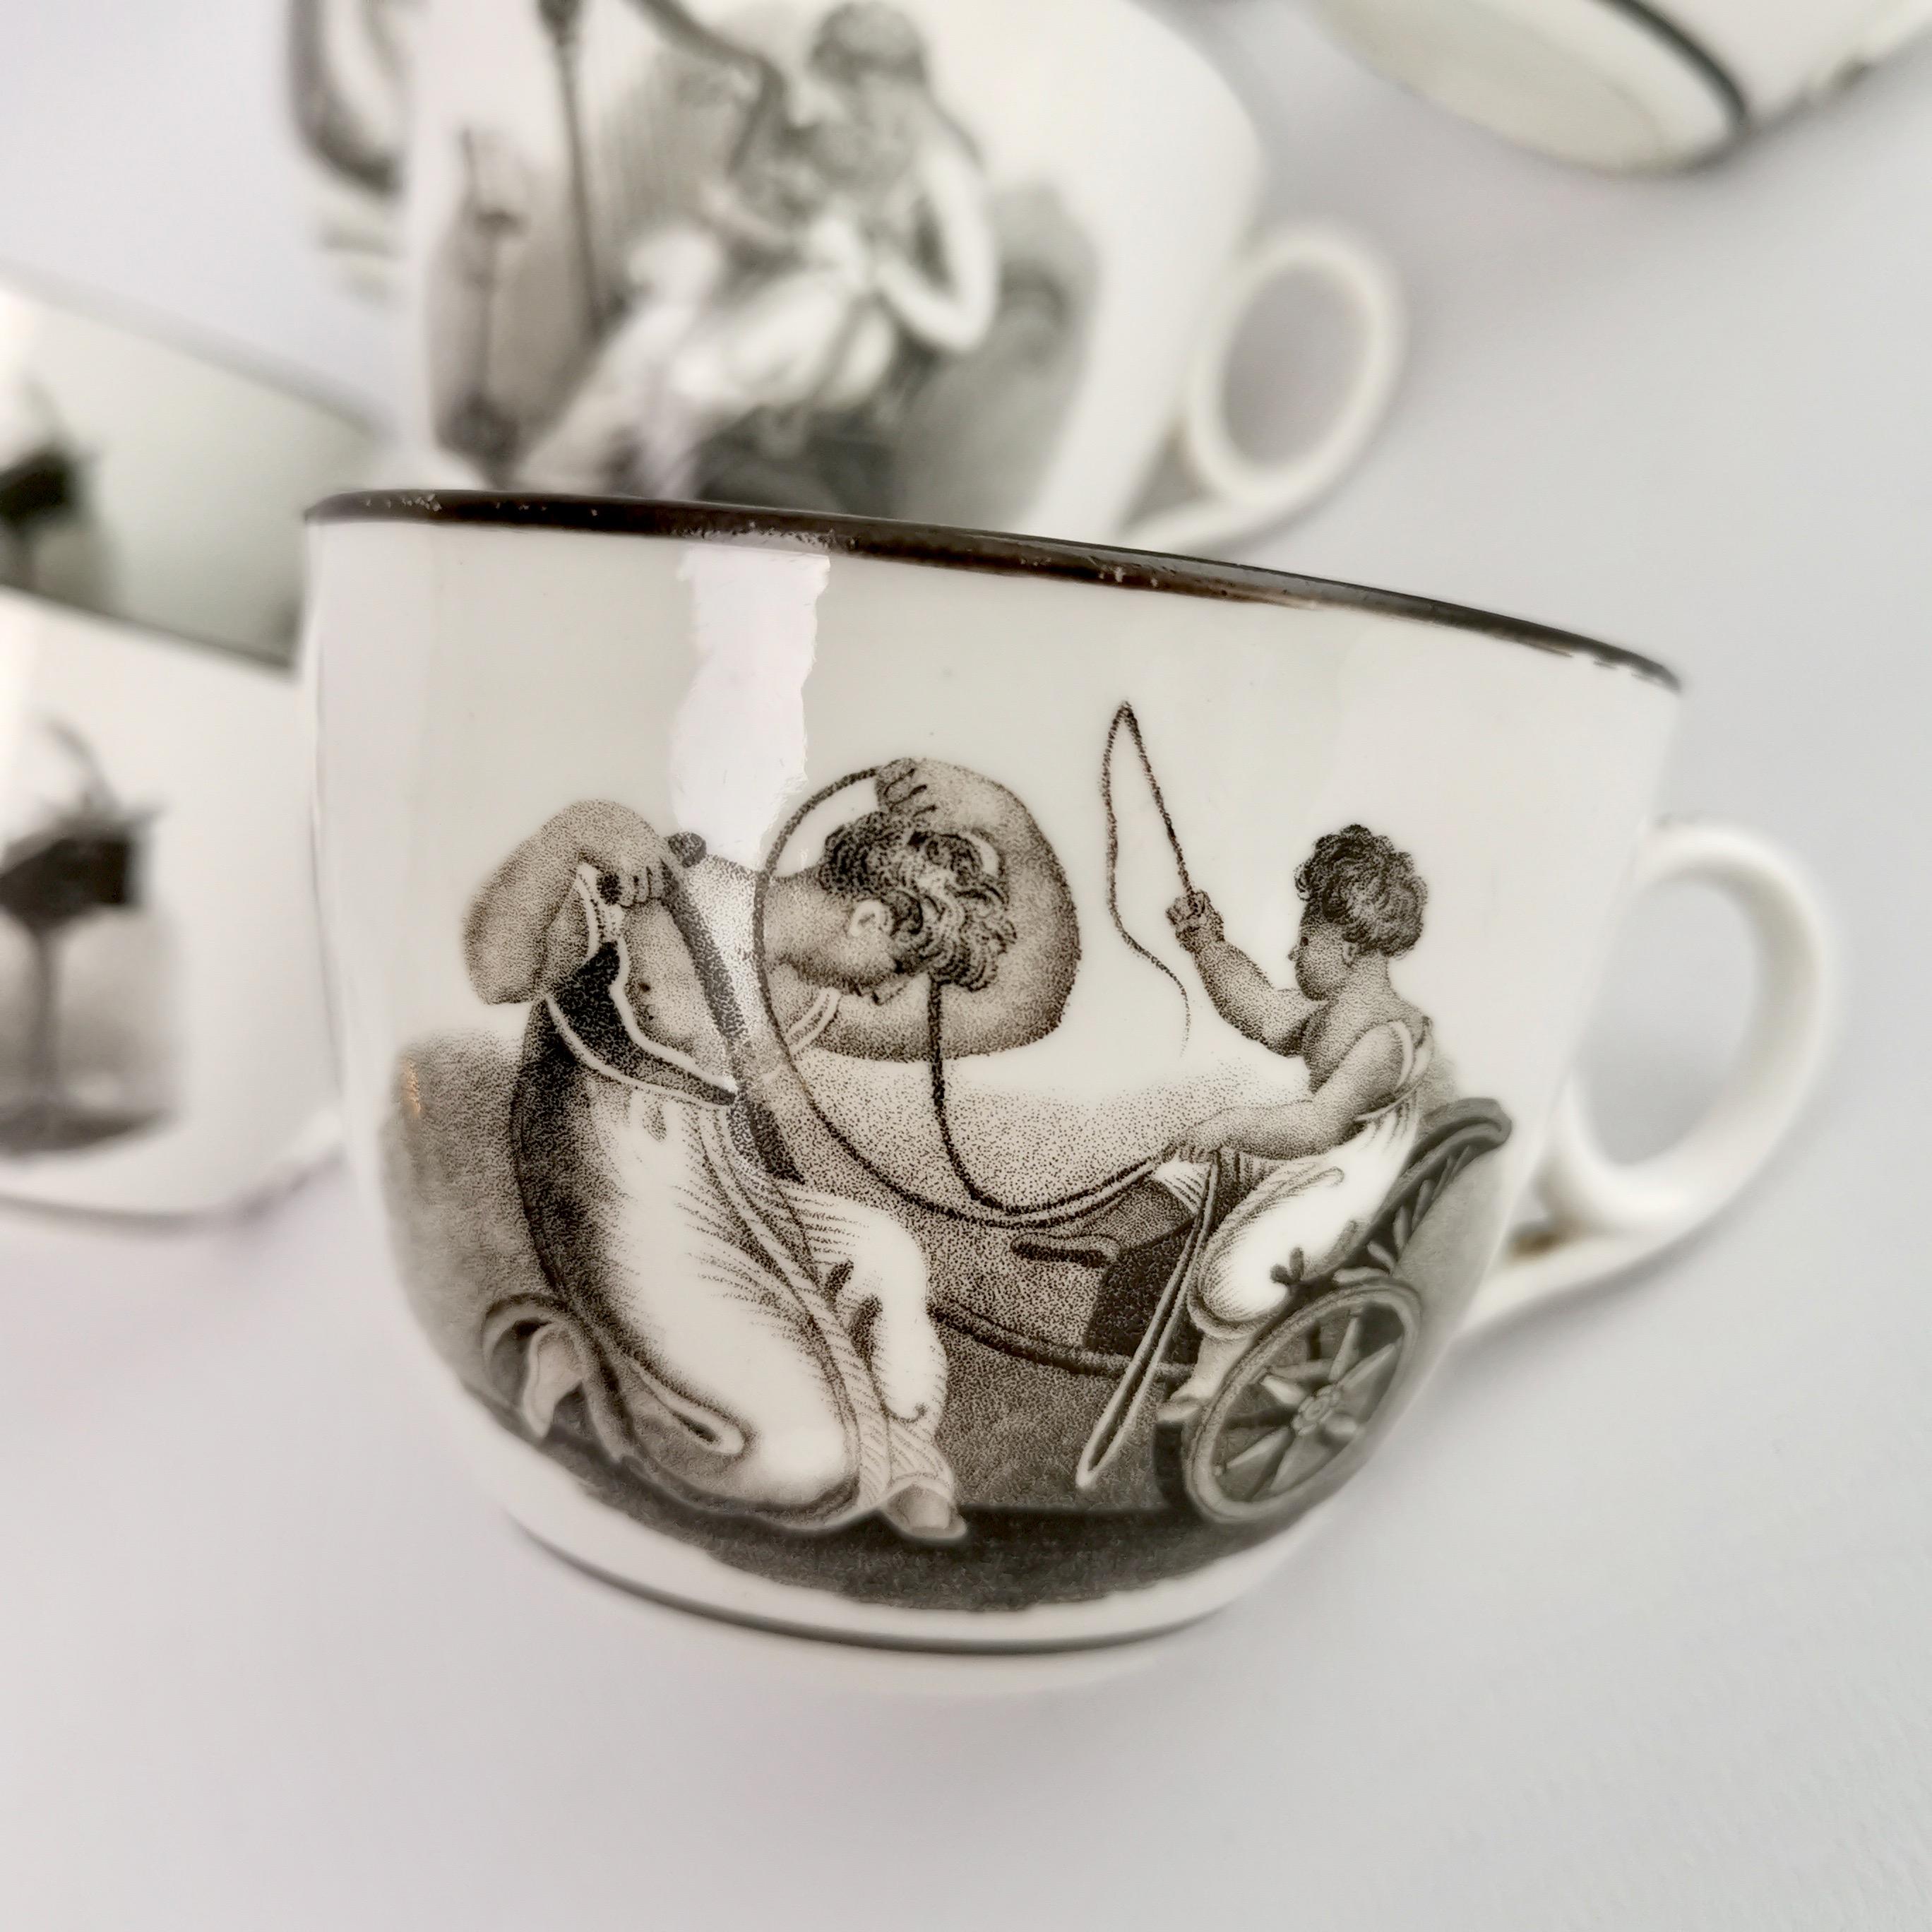 Porcelain New Hall Tea Coffee Service, Black White Bat Printed Muses, Neo-Classical, 1815